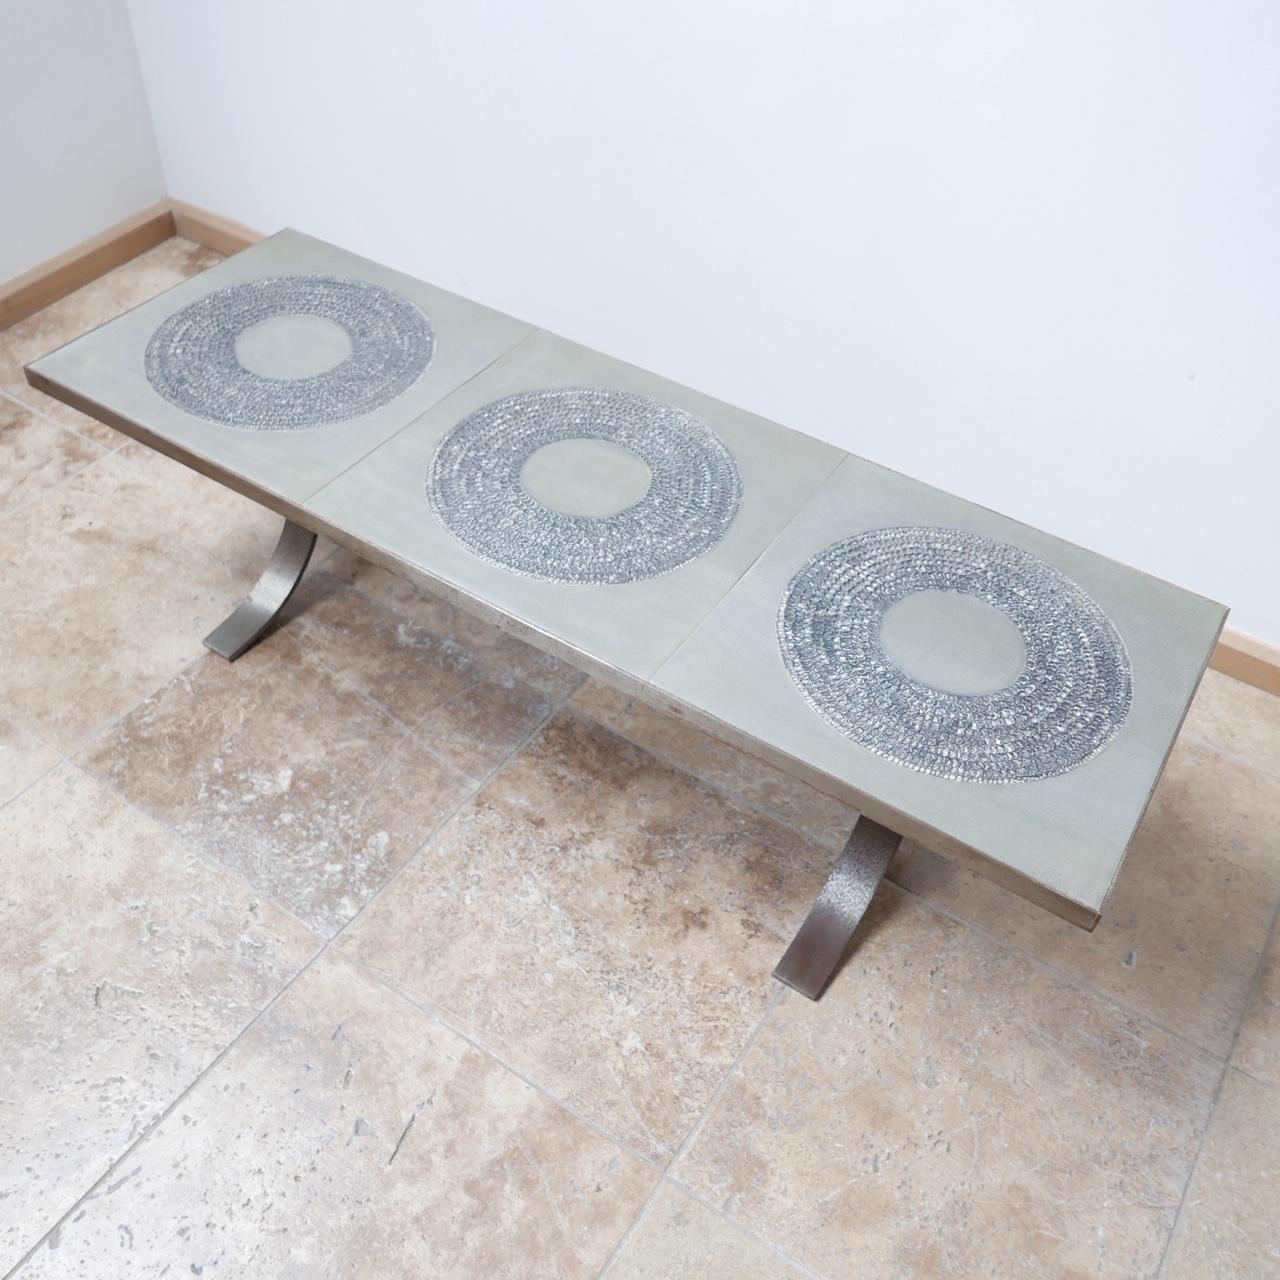 Midcentury Brutalist Coffee Table Attributed to Marc D'Haenens For Sale 4